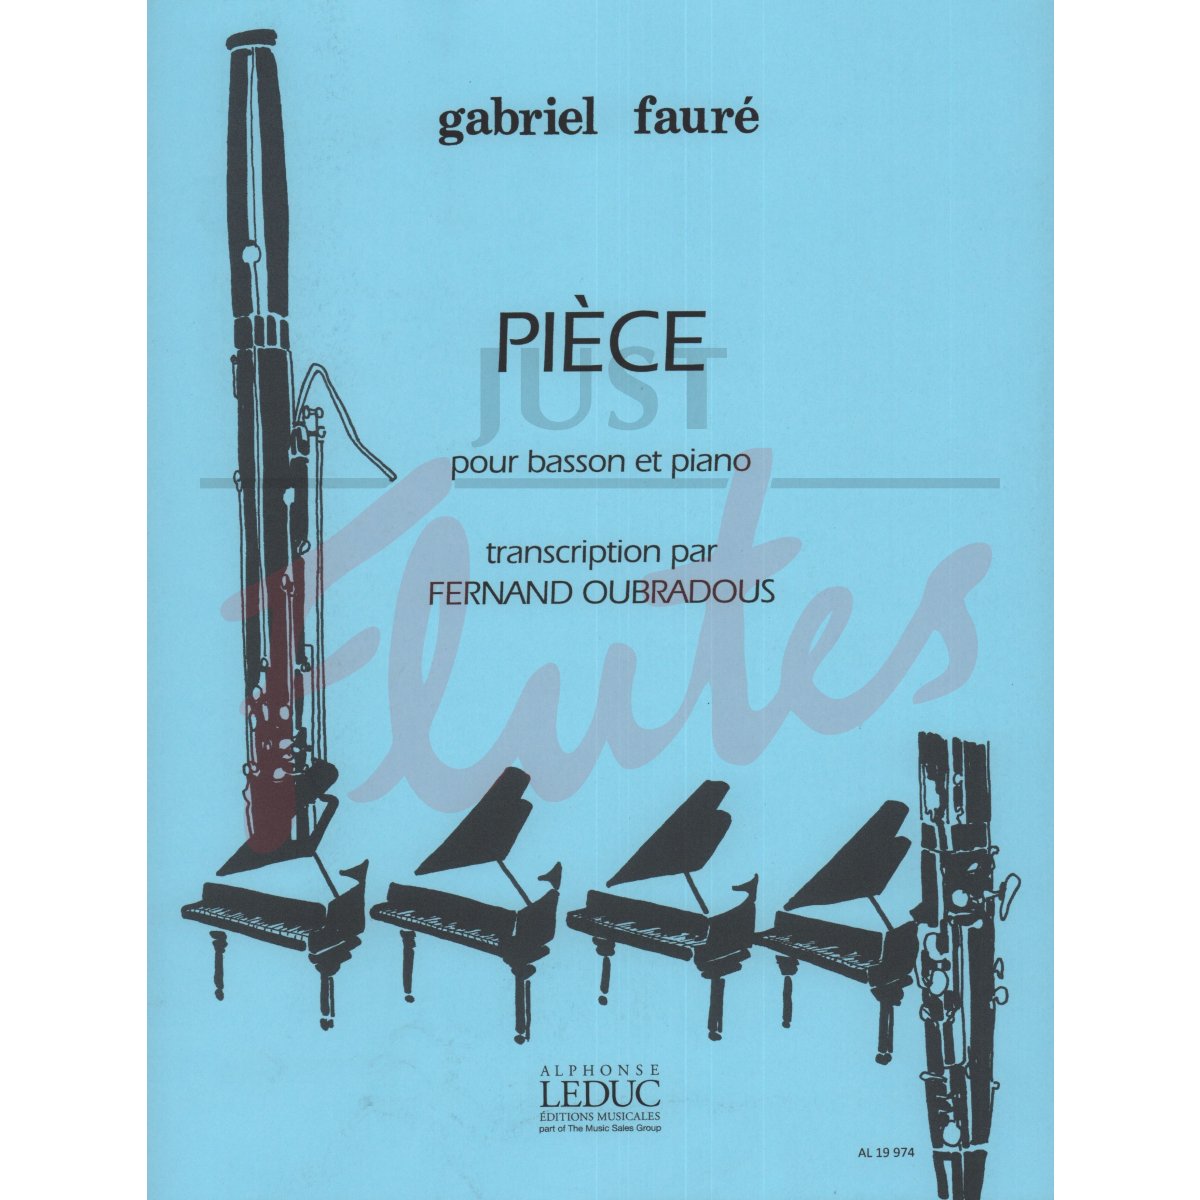 Pièce for Bassoon and Piano